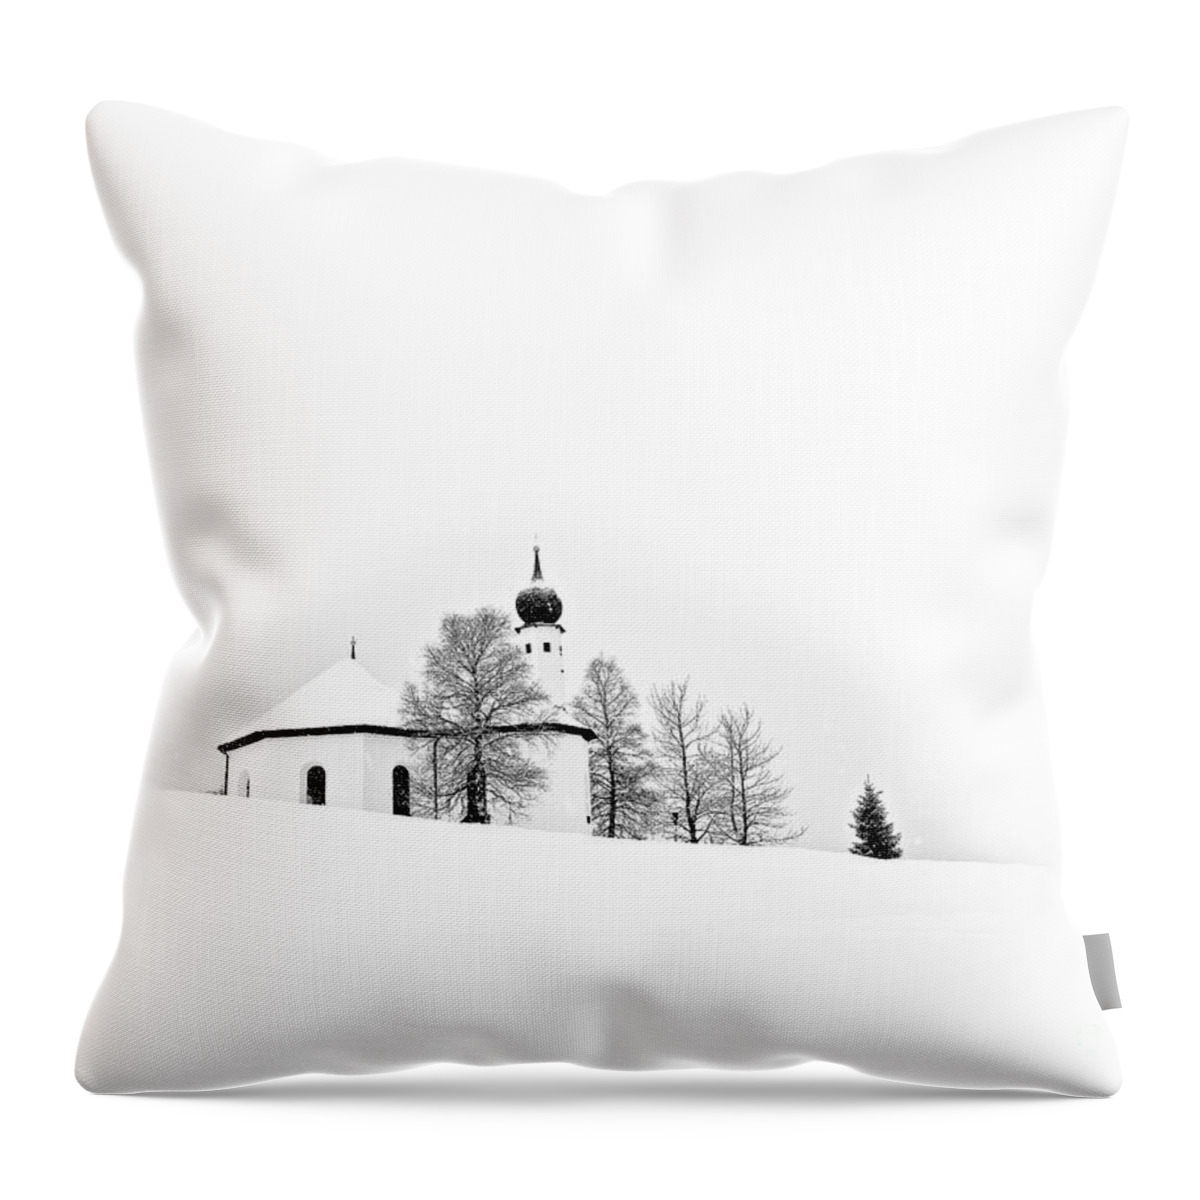 Cozy Snow Winter Austria White Trees Church Stylish Contemporary Conceptual Christmas Atmospheric Peaceful Beautiful Delightful Delicate Gentle Soft Snowdrifts Painterly Graphical Black Mono B&w Minimal Minimalist Minimalism Simplistic Simple Attractive Restful Relaxing Drawing Graphics Covered Xmas Season Greetings Enjoyable Cold Freezing Warm Calm Card Tranquility Relaxation Serene Singular Scenery View Magical Fairy Tale Elements Poetic Artistic Tranquility Snowing Snowfall Spiritual Inspire Throw Pillow featuring the photograph Snow, Cosy Snow, White Christmas by Tatiana Bogracheva